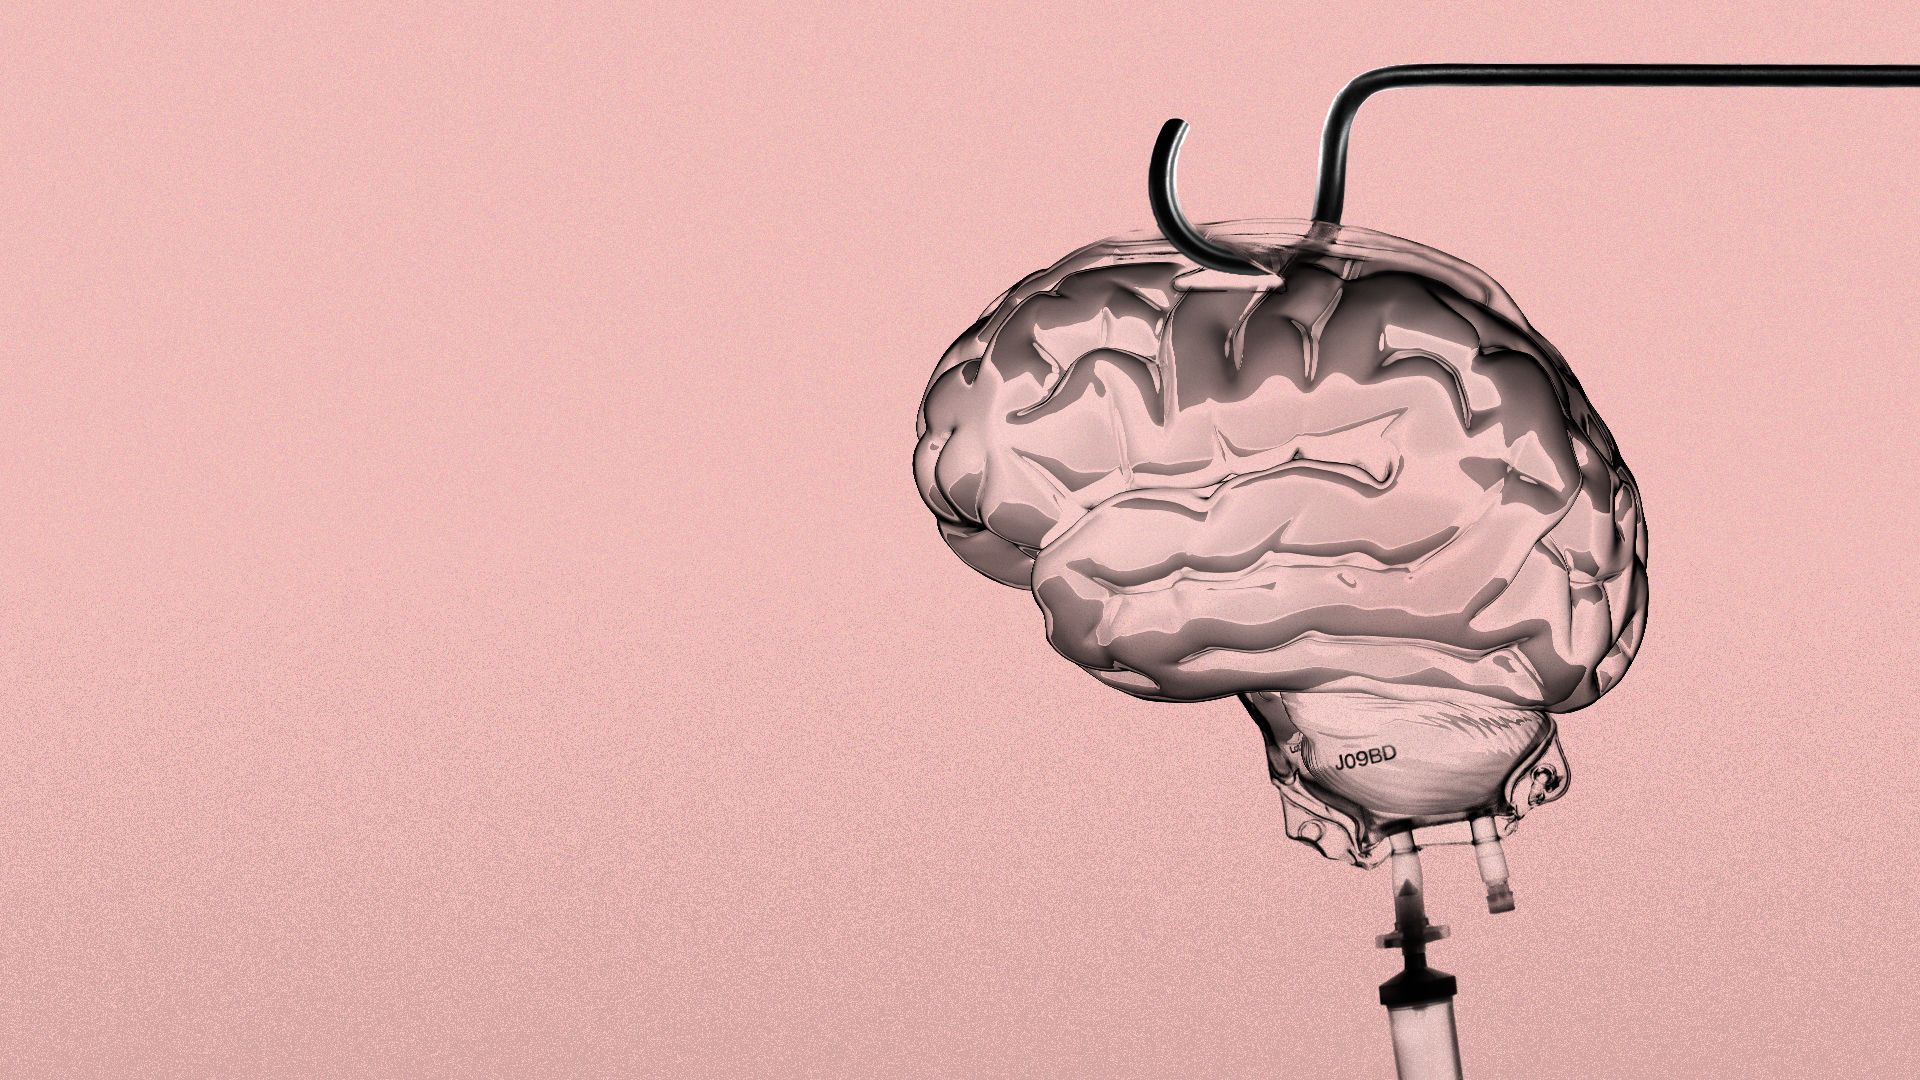 Illustration of a brain shaped IV bag hanging from a stand.